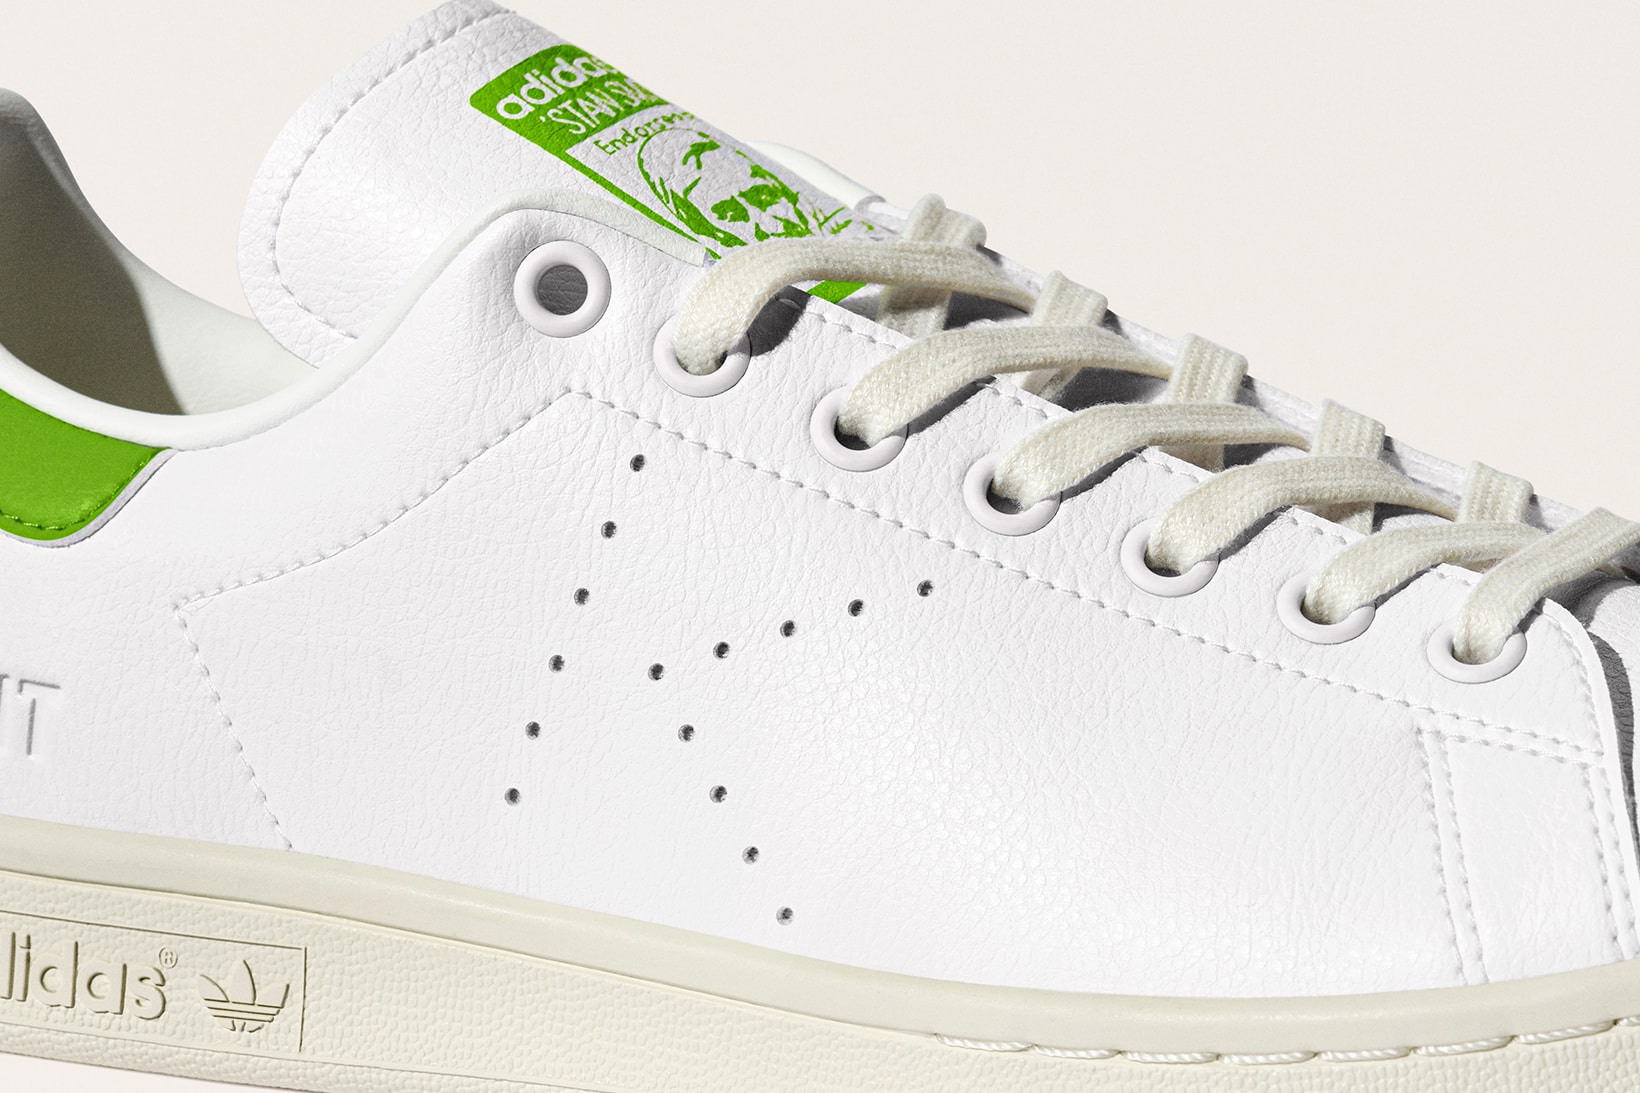 adidas originals muppets kermit the frog stan smith collaboration sneakers white green colorway footwear shoes sneakerhead